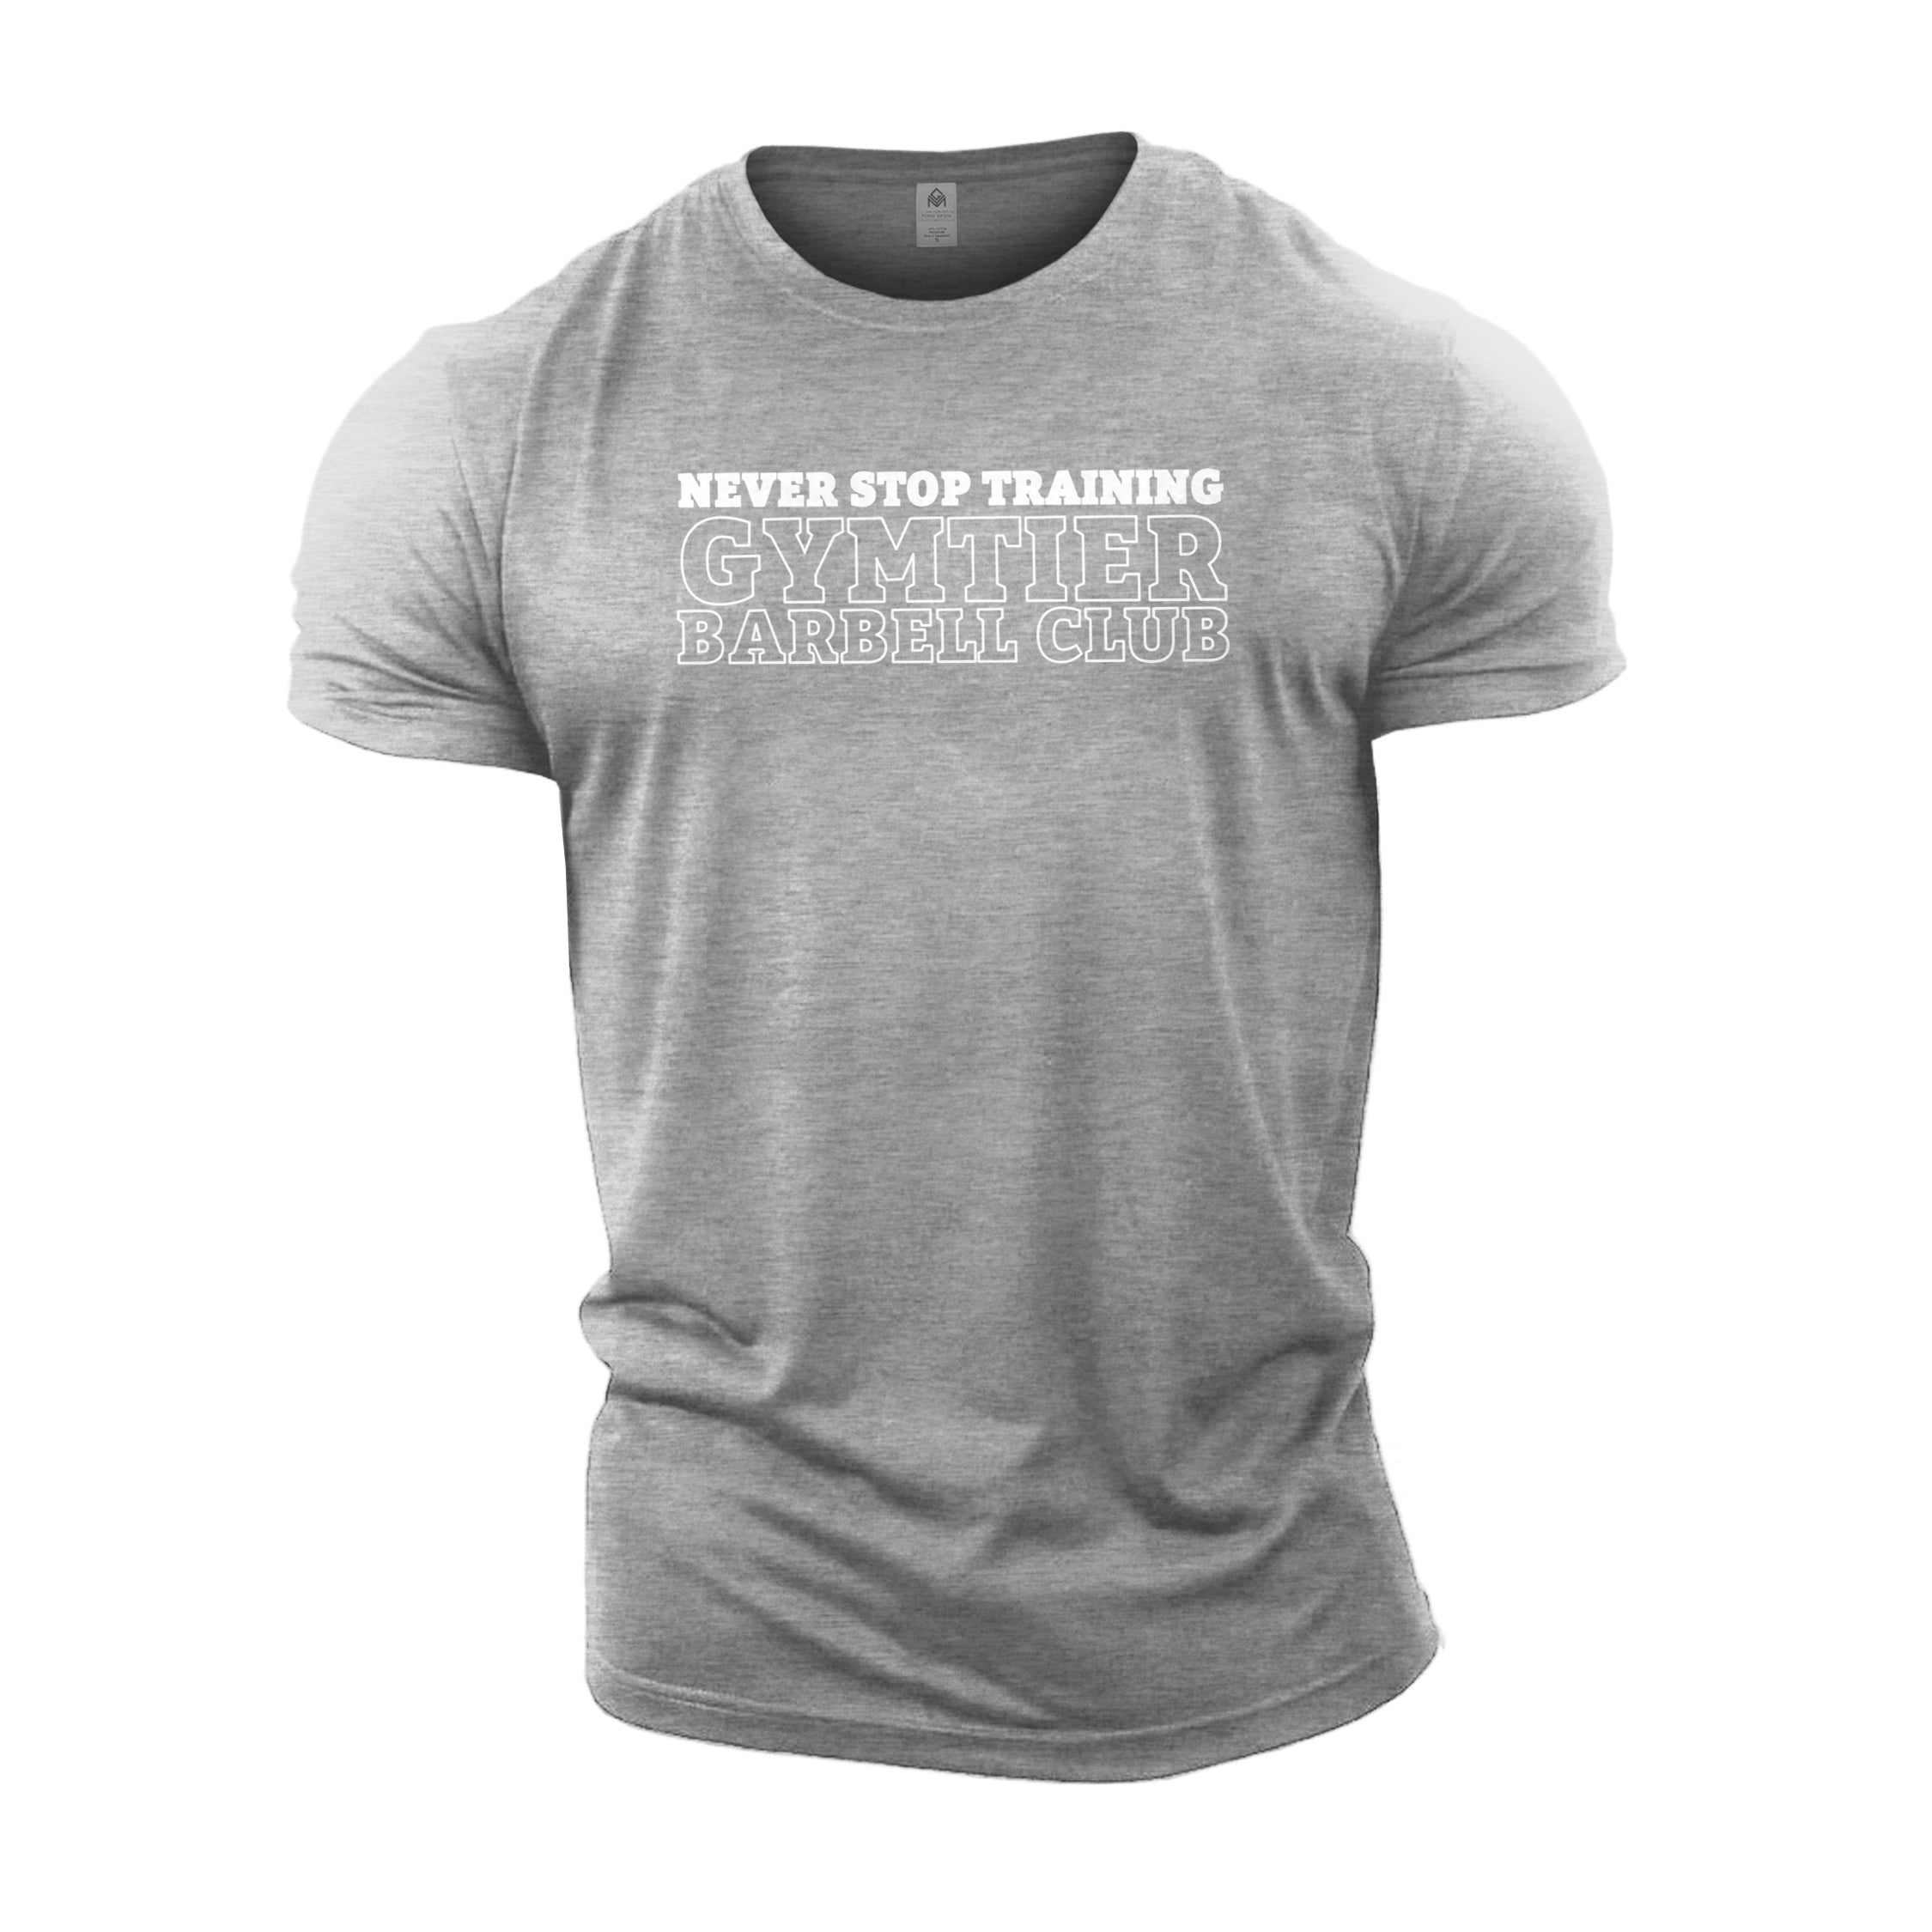 Gymtier Barbell Club - Never Stop Training Chest - Gym T-Shirt